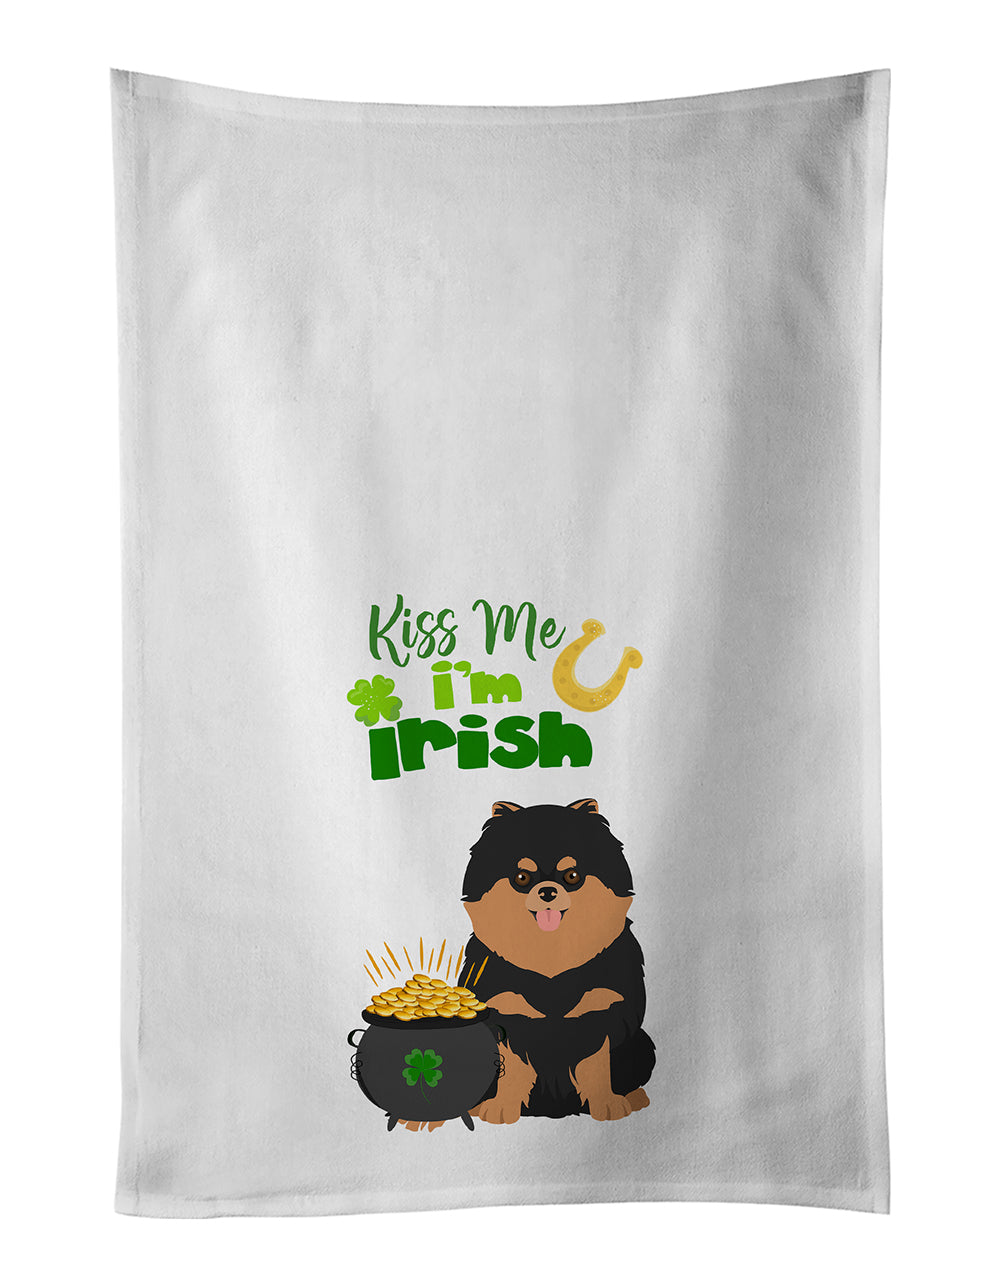 Buy this Black and Tan Pomeranian St. Patrick's Day White Kitchen Towel Set of 2 Dish Towels